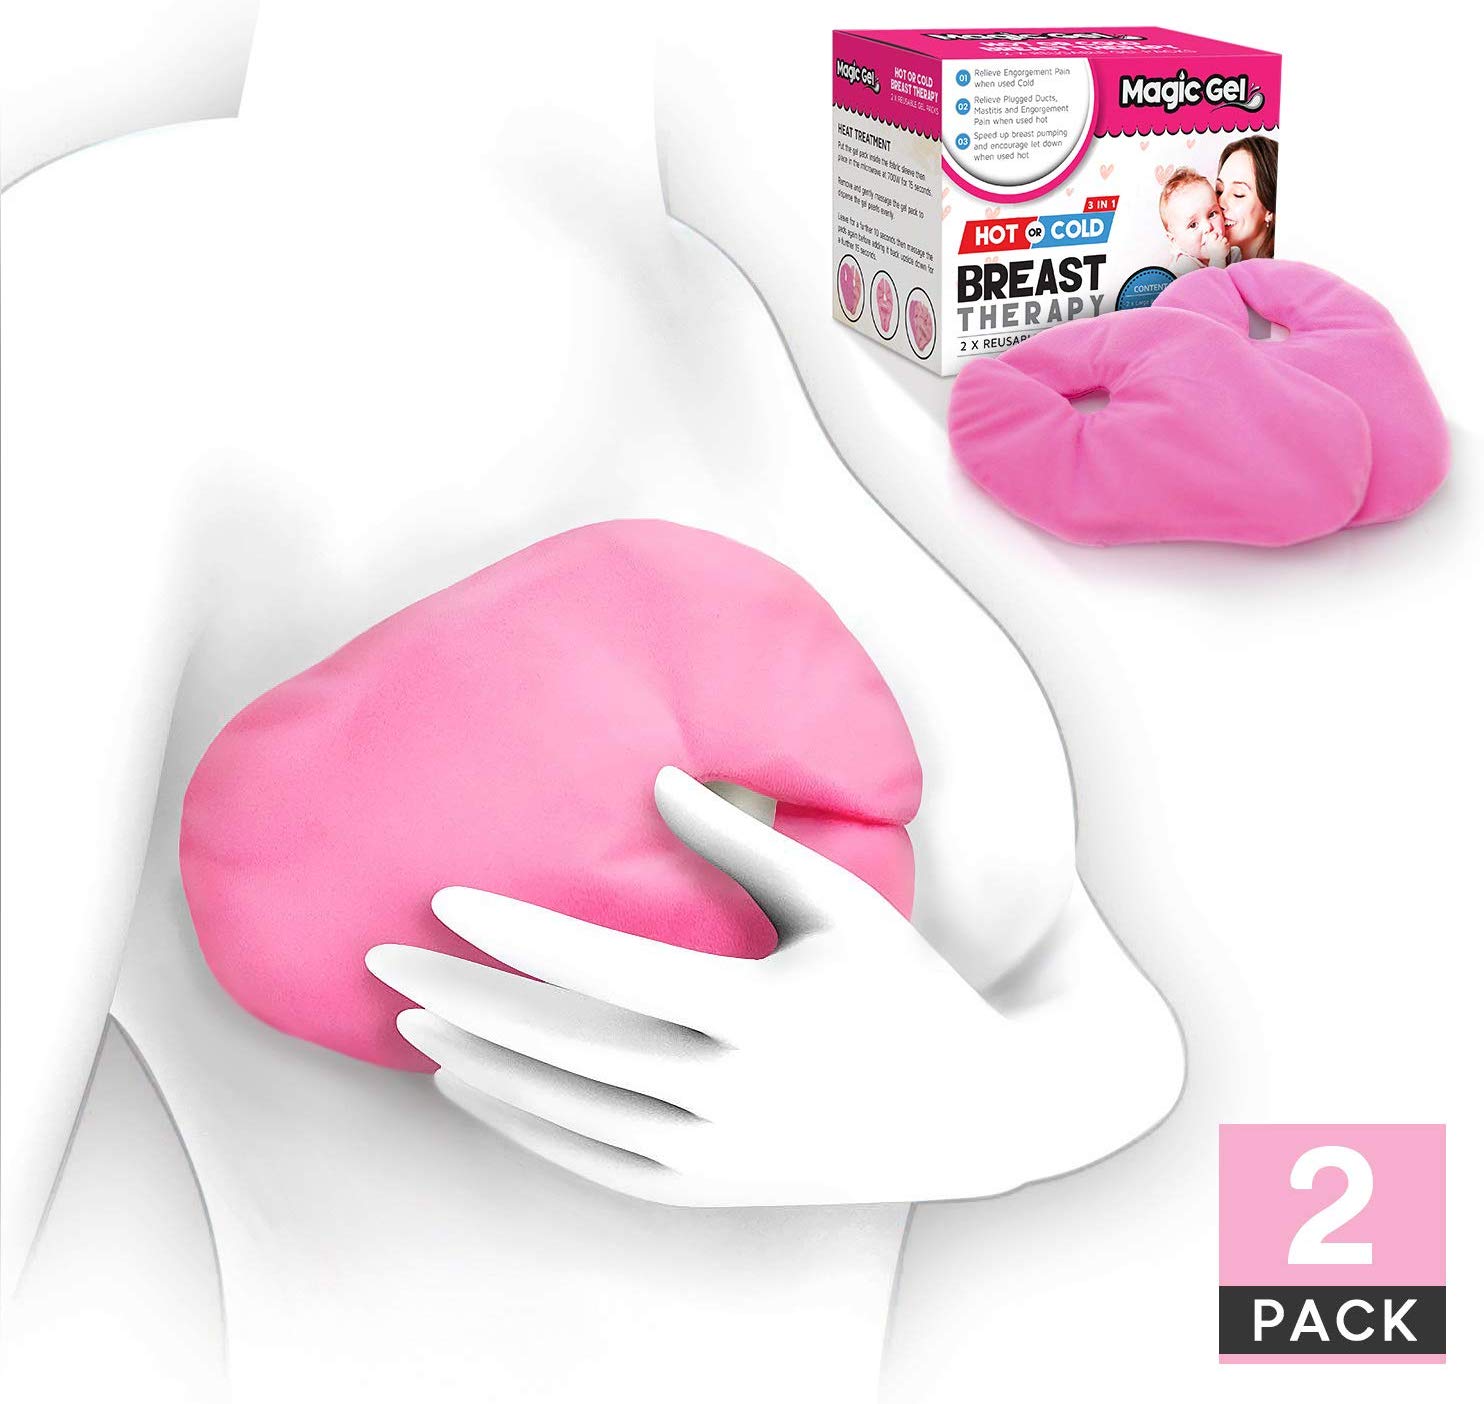 Breast Ice Pack or a Breastfeeding Heating pad